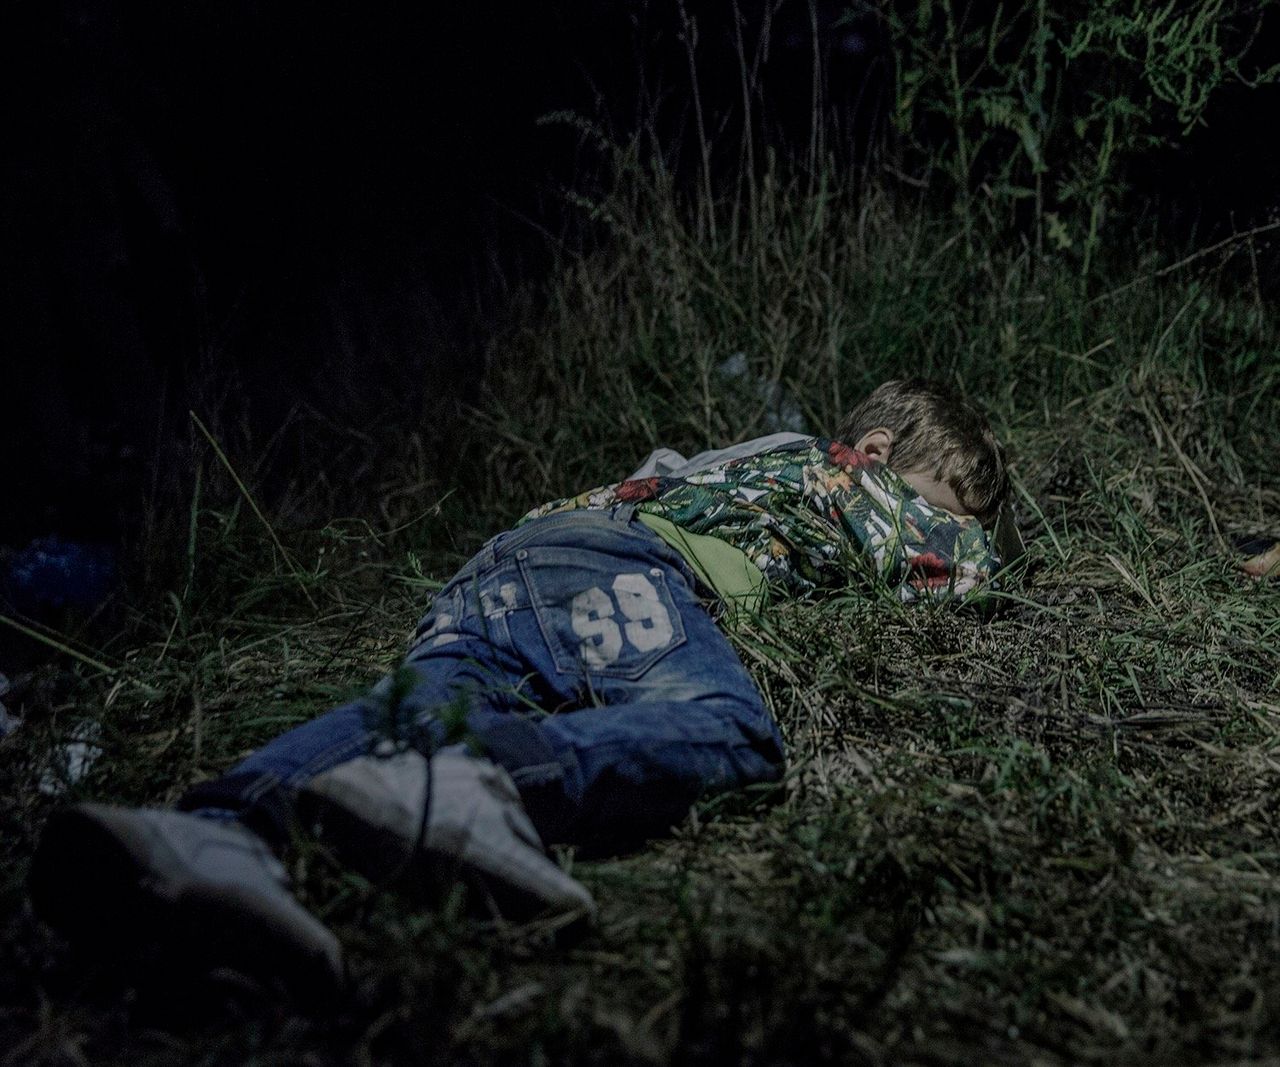 Wennman shot the photos in 2015, while traveling through Lebanon, Jordan, Turkey, Greece, Hungary, Serbia, Sweden and Germany on assignment for the Scandinavian newspaper, Aftonbladet, covering the Syrian crisis. 